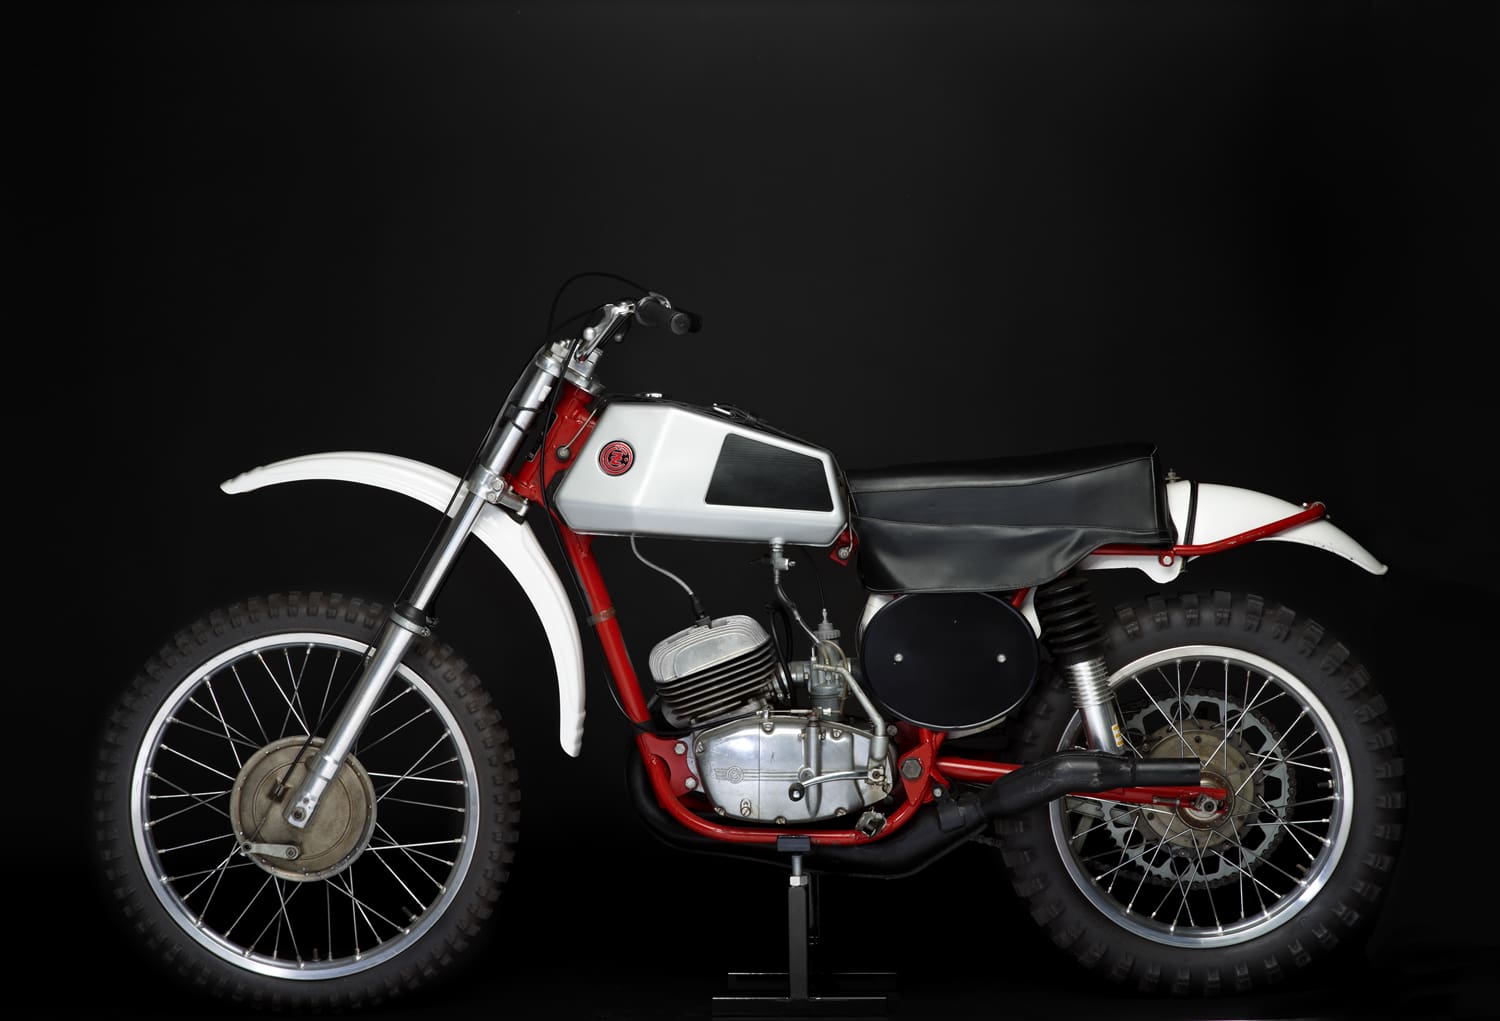 A white and red dirt bike on a black background.